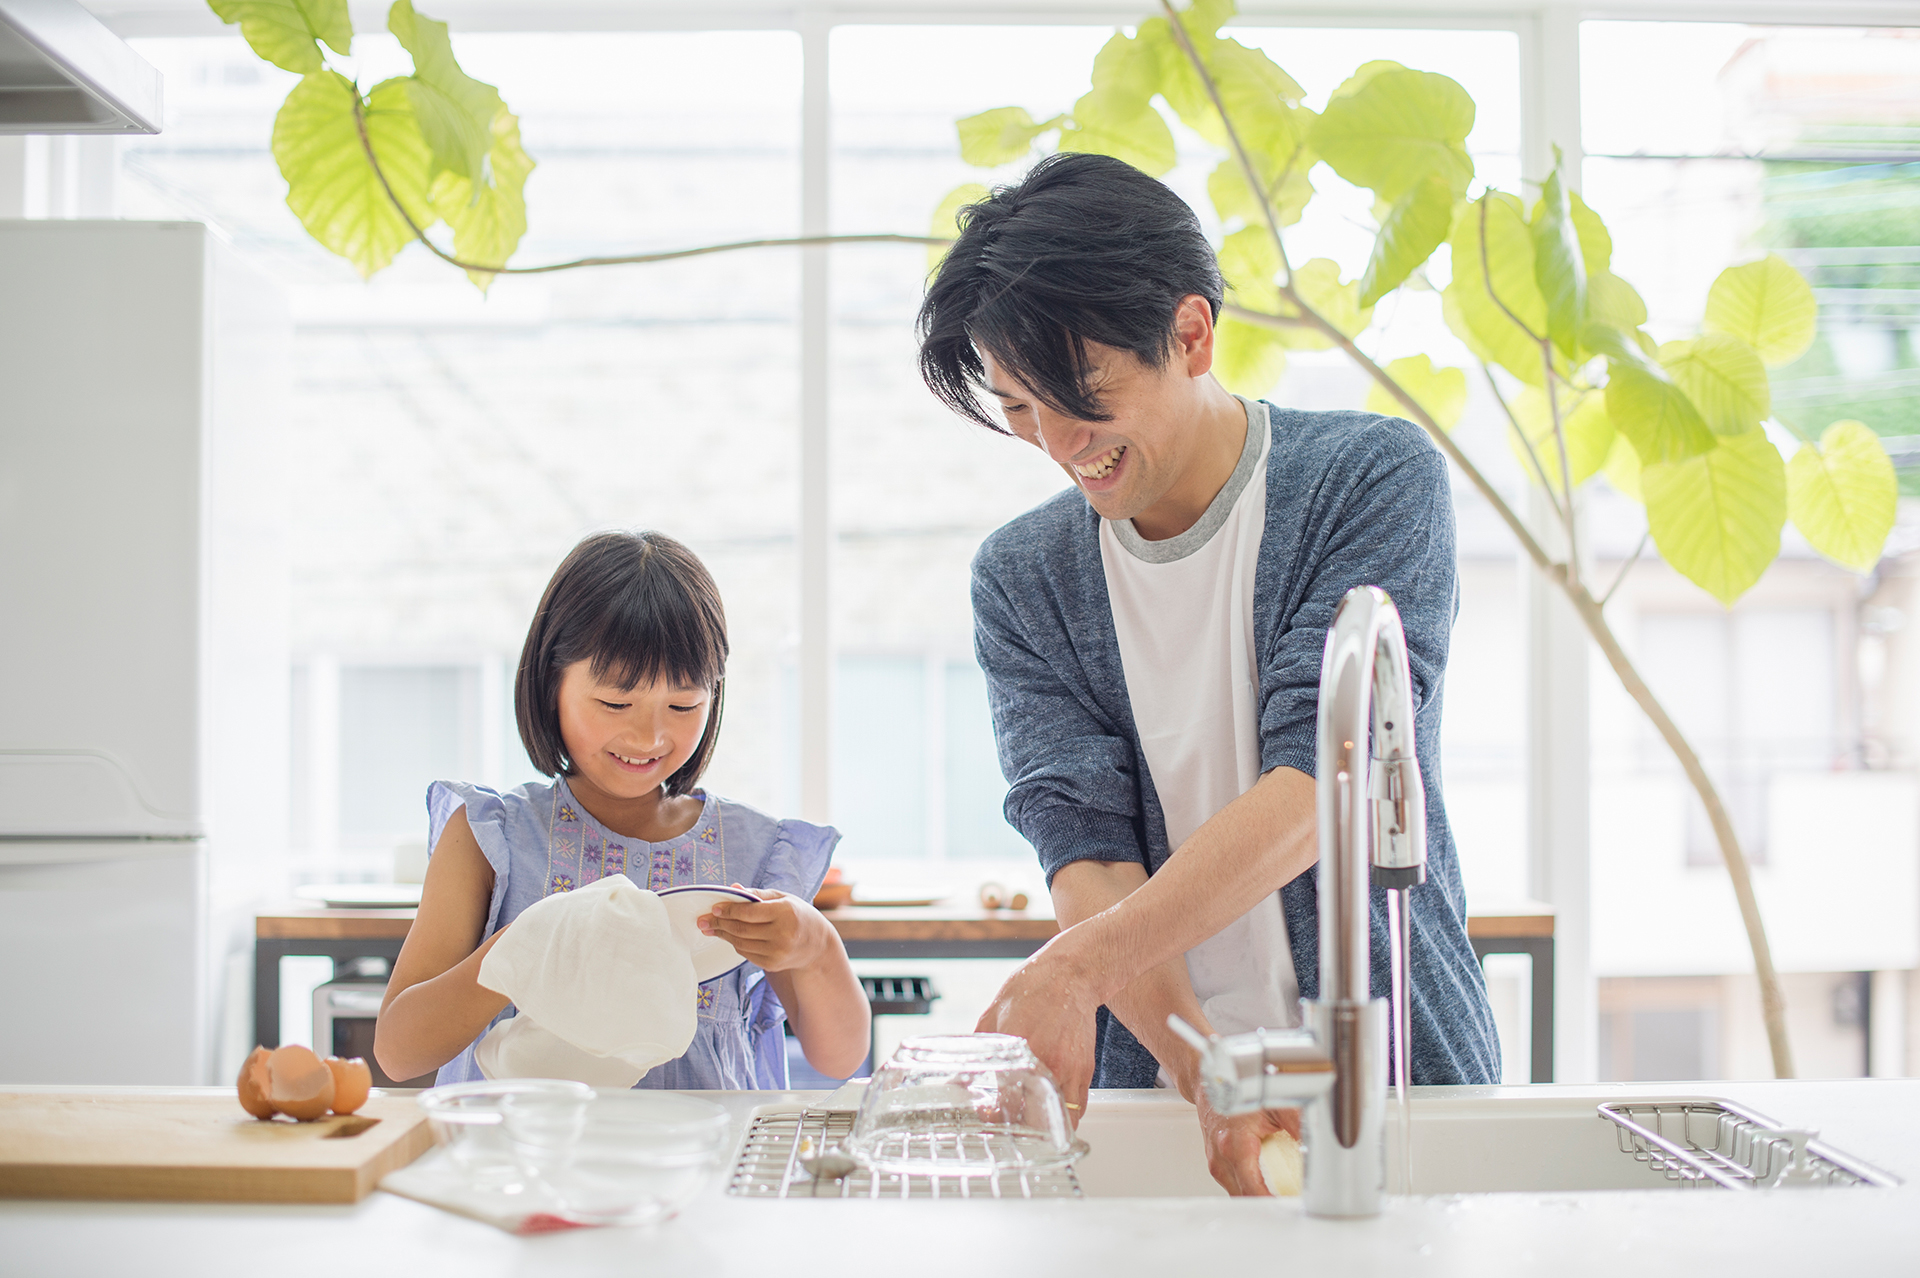 Father and daughter washing dishes in the sink together by hand